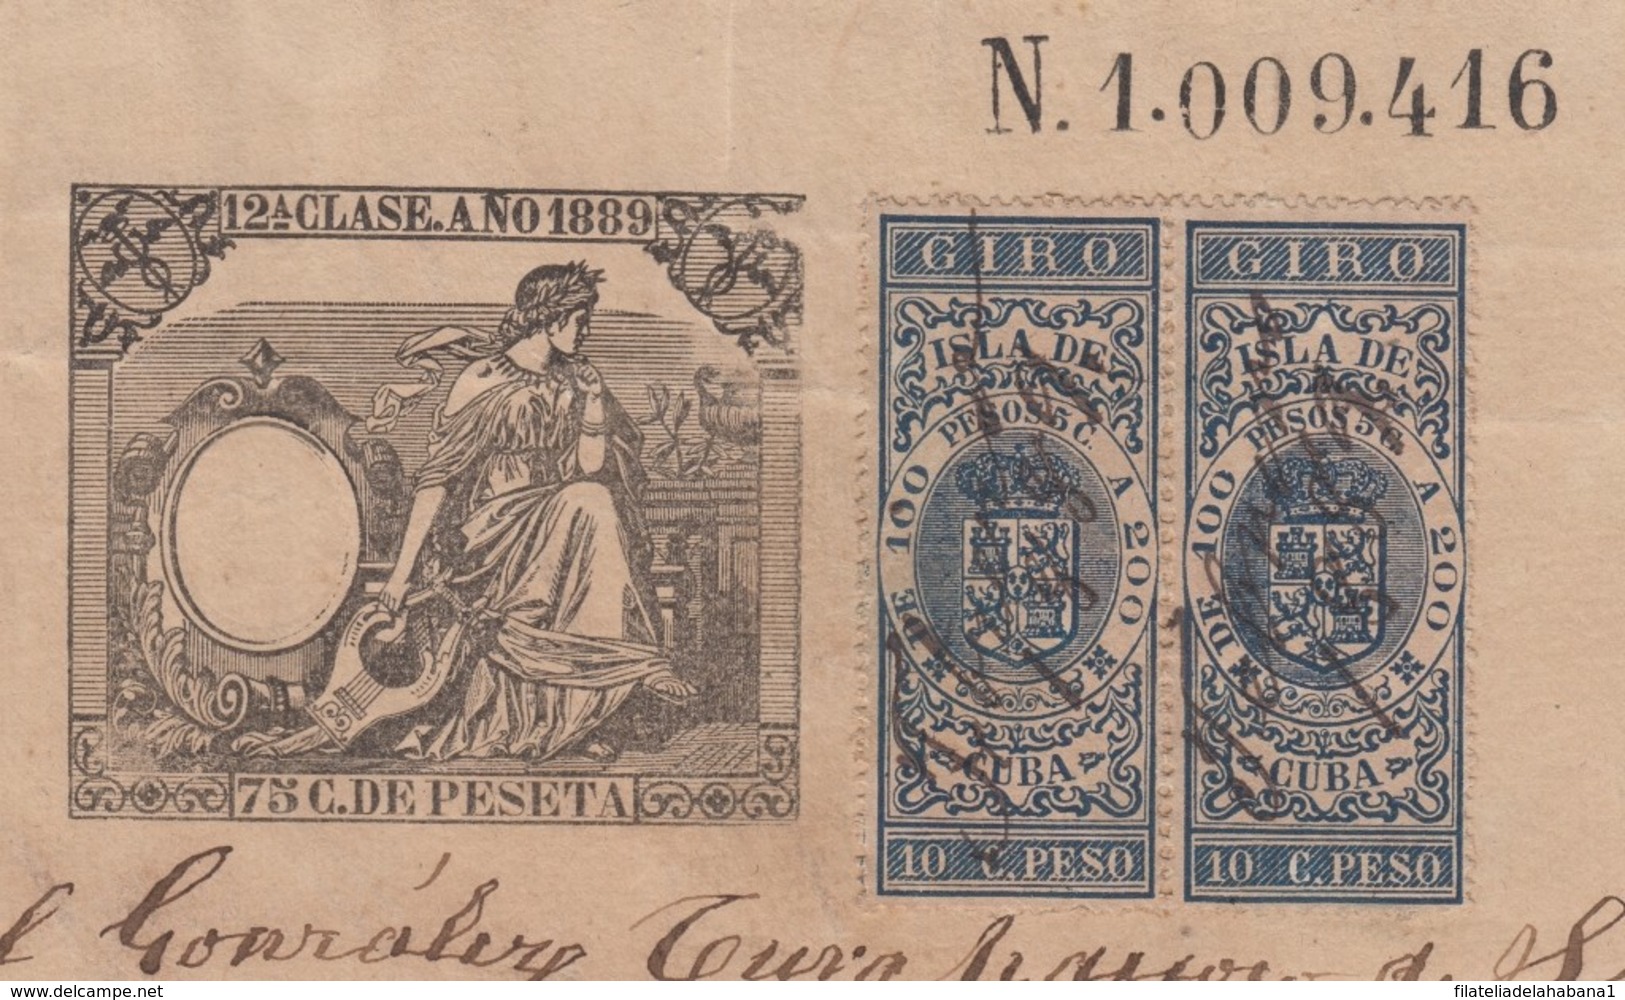 GIR-47 CUBA (LG1517) SPAIN ANT. REVENUE 1889 SEALLED PAPER + GIROS STAMPS. - Timbres-taxe